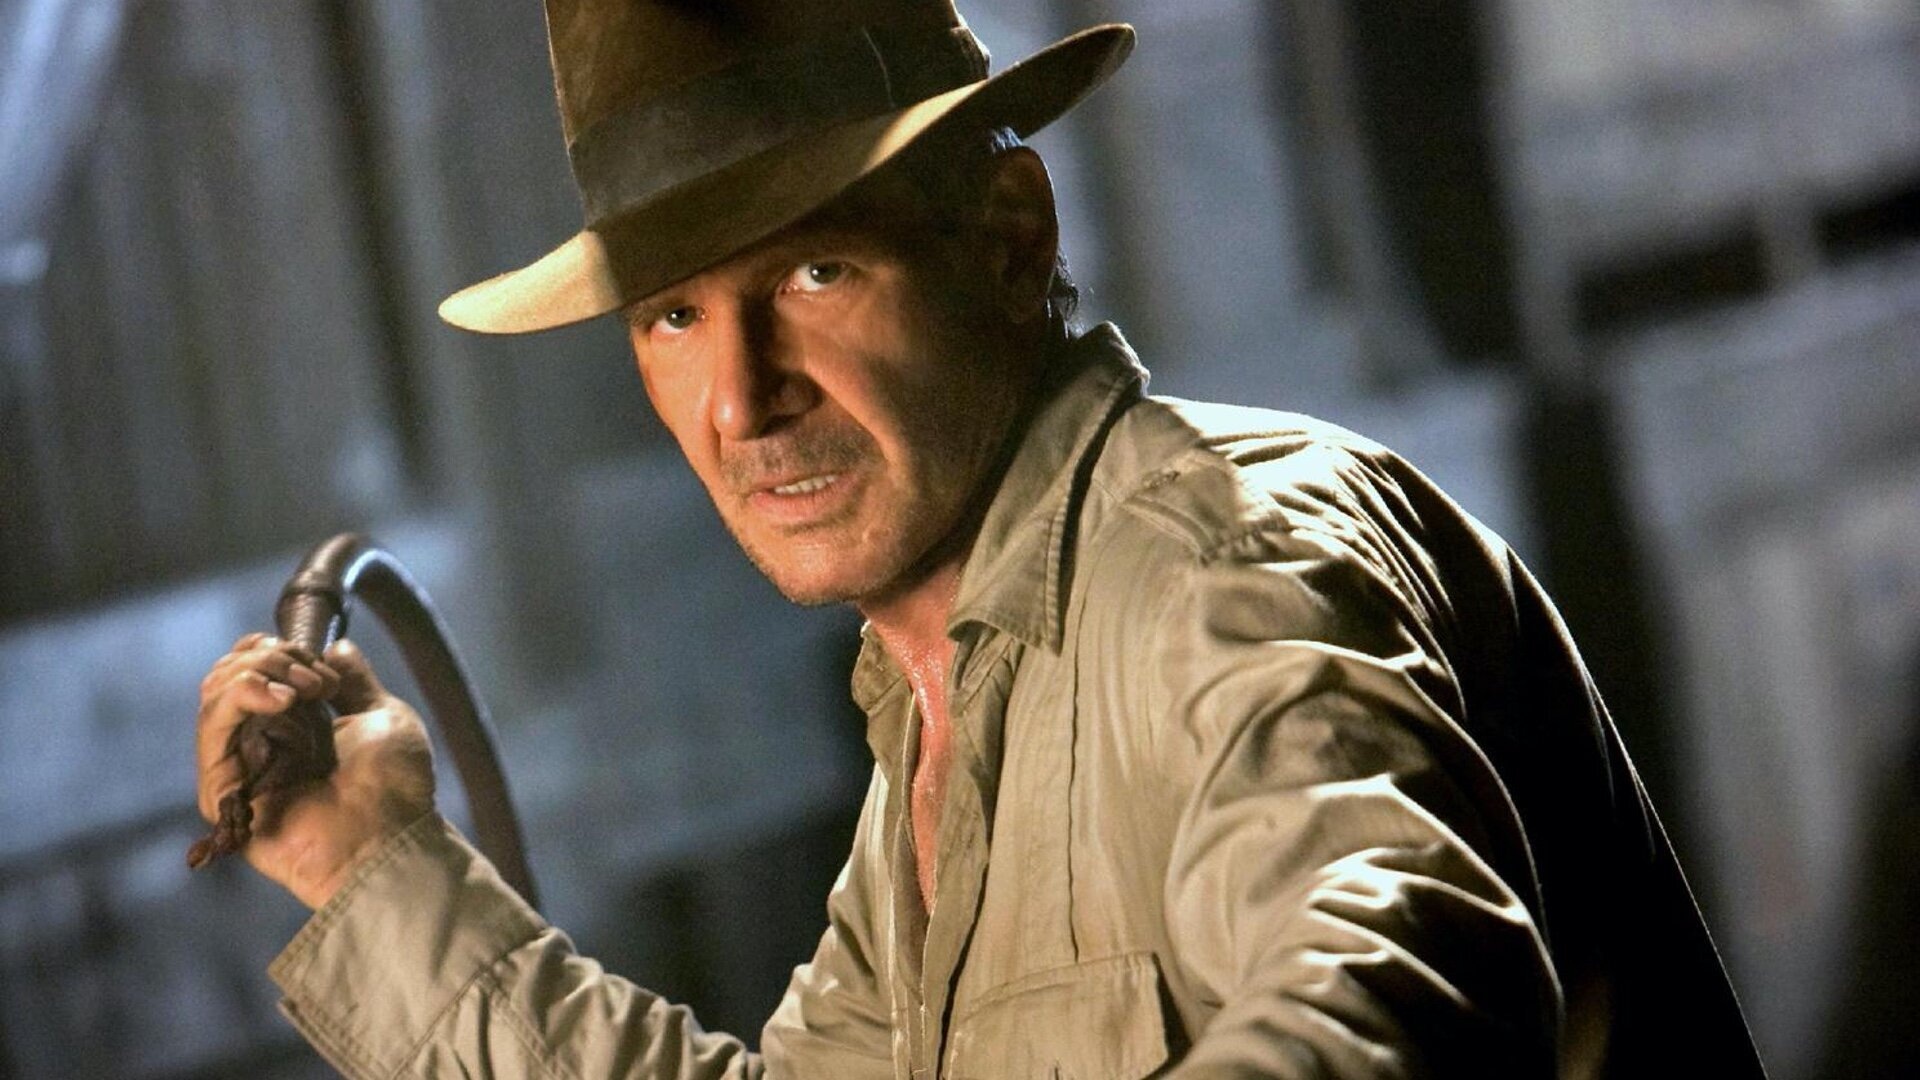 Harrison Ford (Indiana Jones): One of the most well-known fictional characters in history. 1920x1080 Full HD Wallpaper.